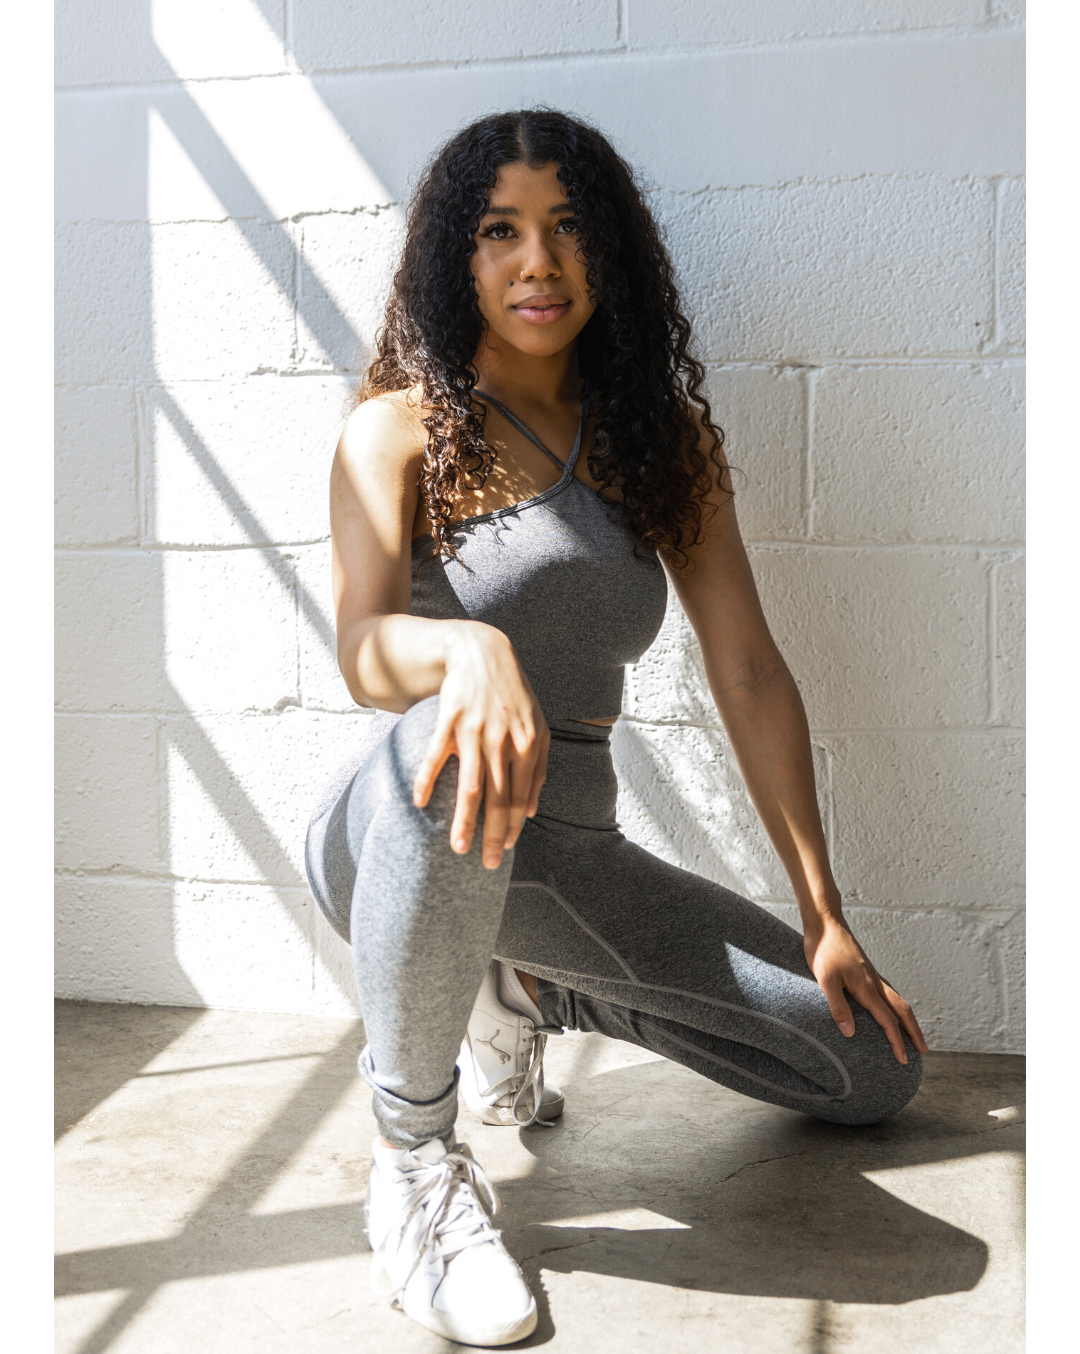 Energetic and supportive fitness wear